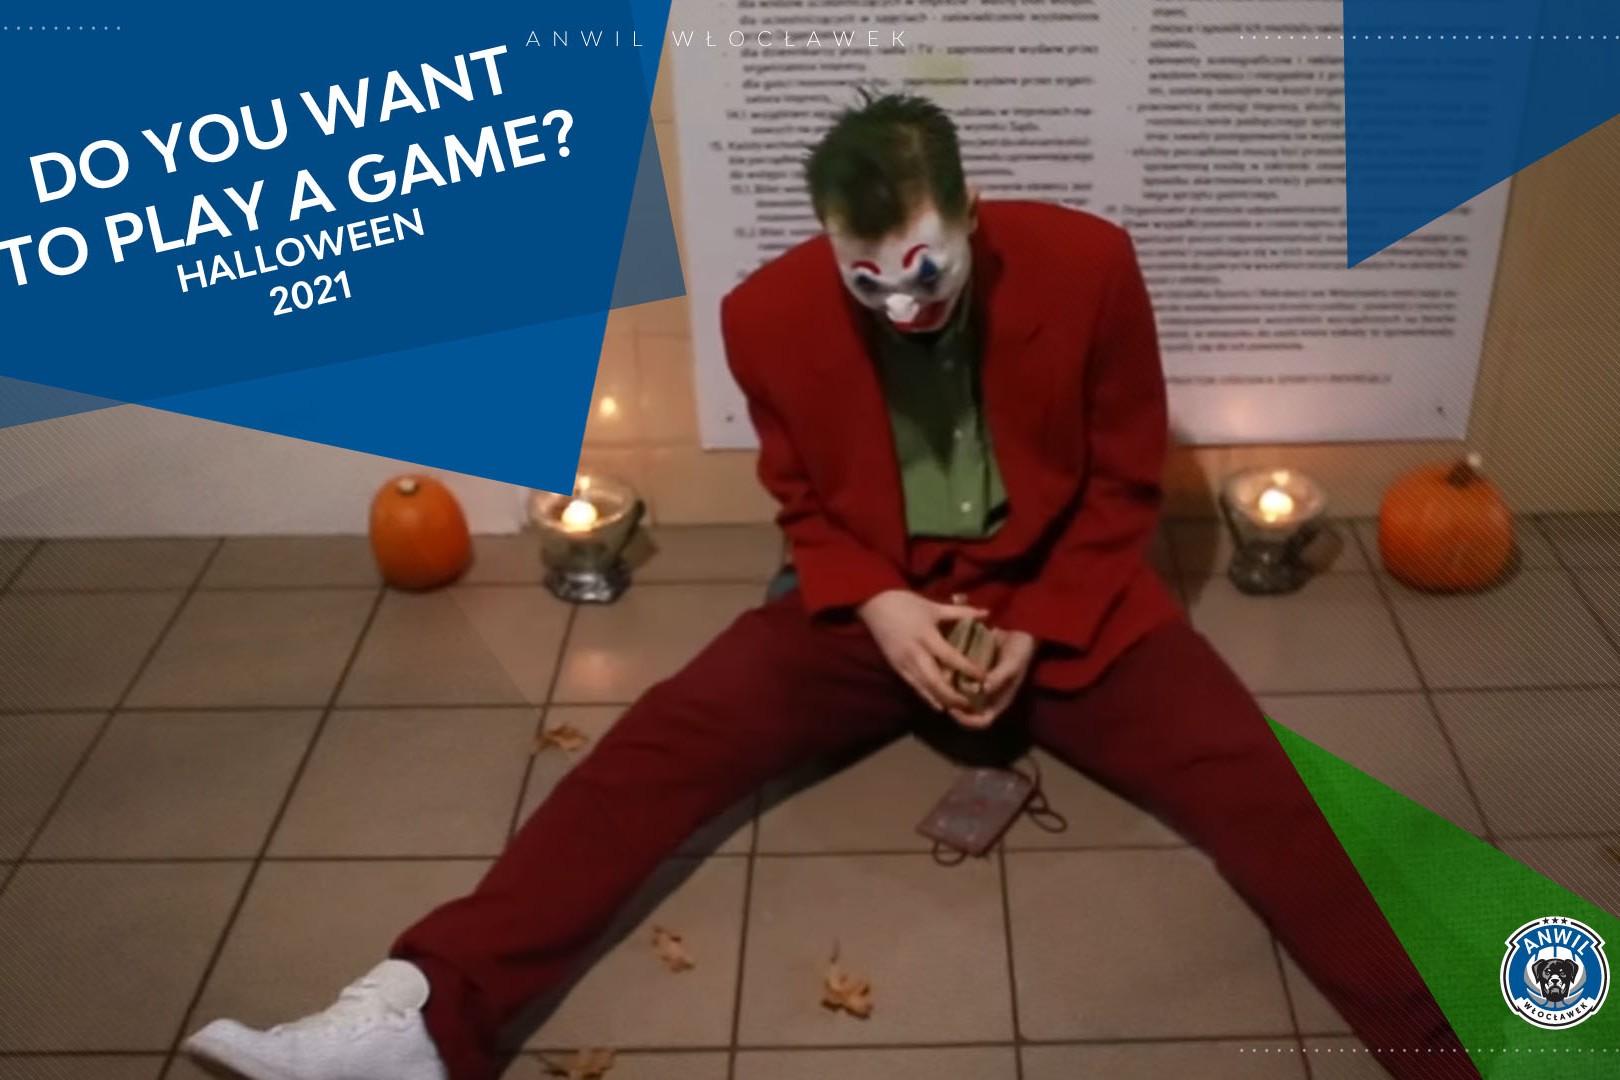 Do You Want To Play A Game? | Halloween 2021